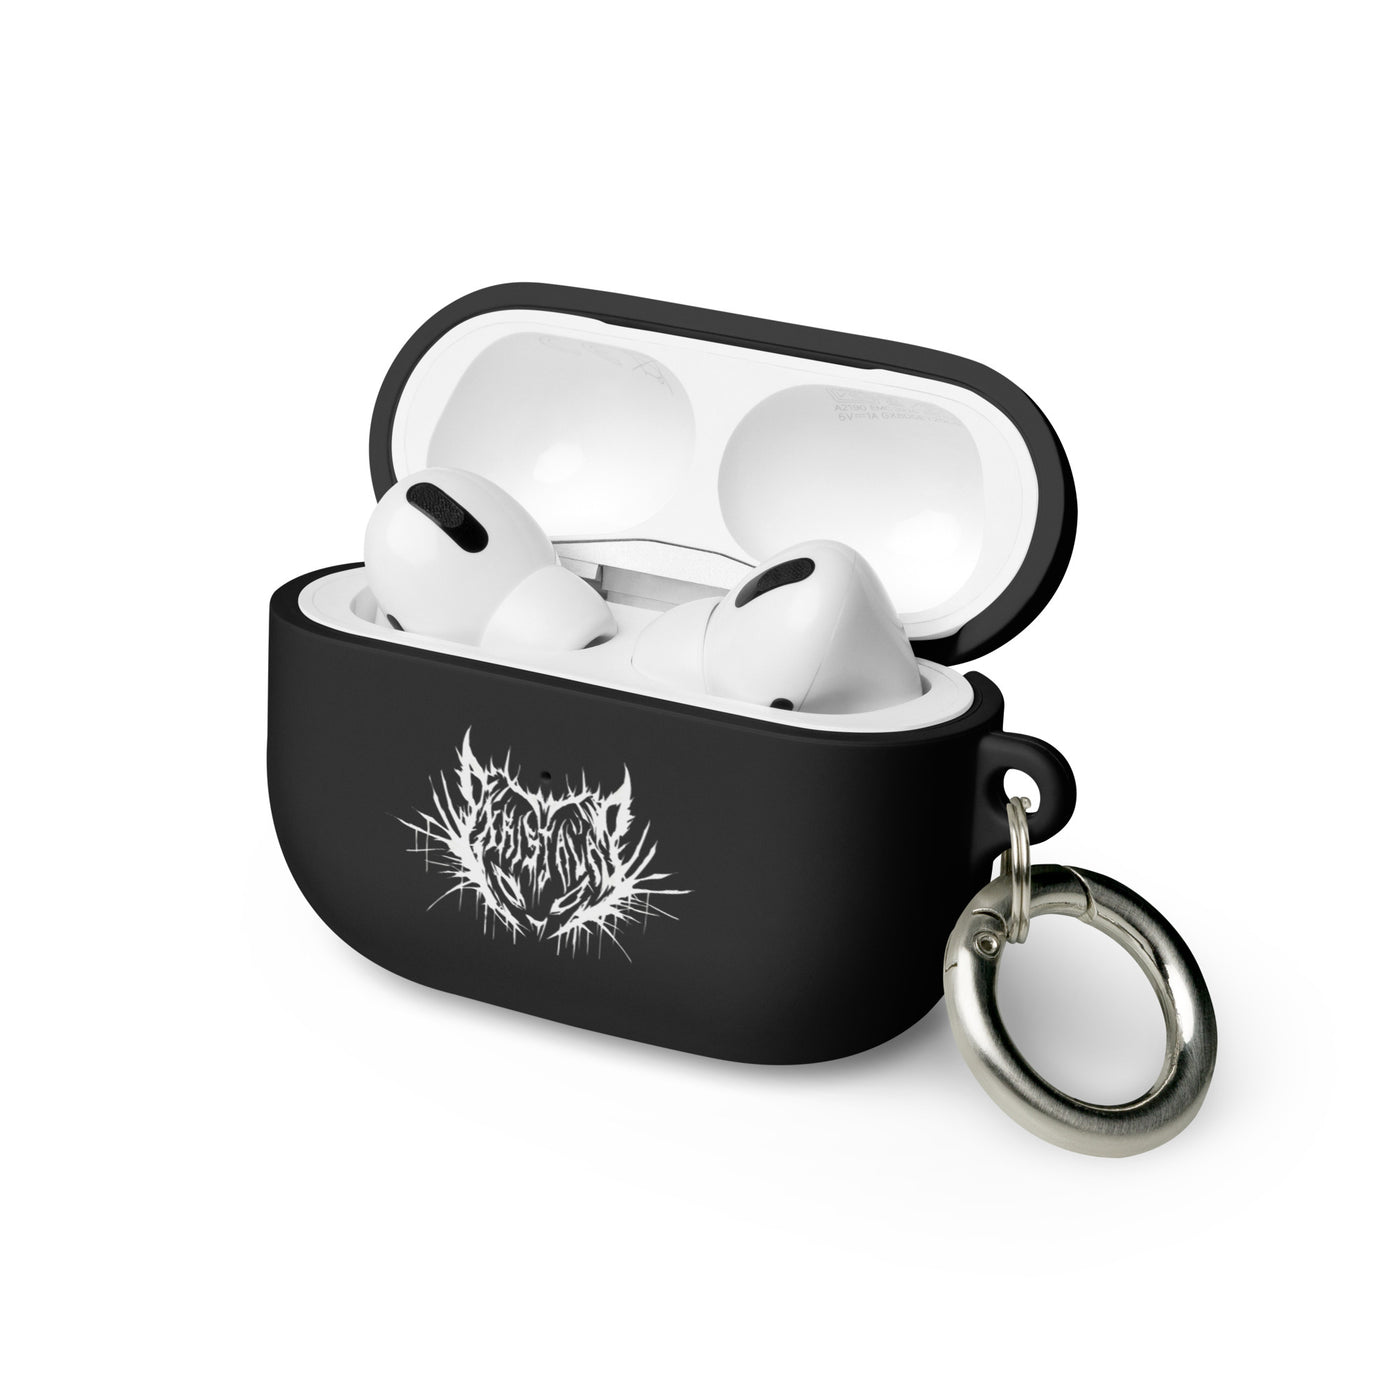 sleek matte black airpods pro case open with kristala x metal voices white cat logo and silver keychain attachment white background